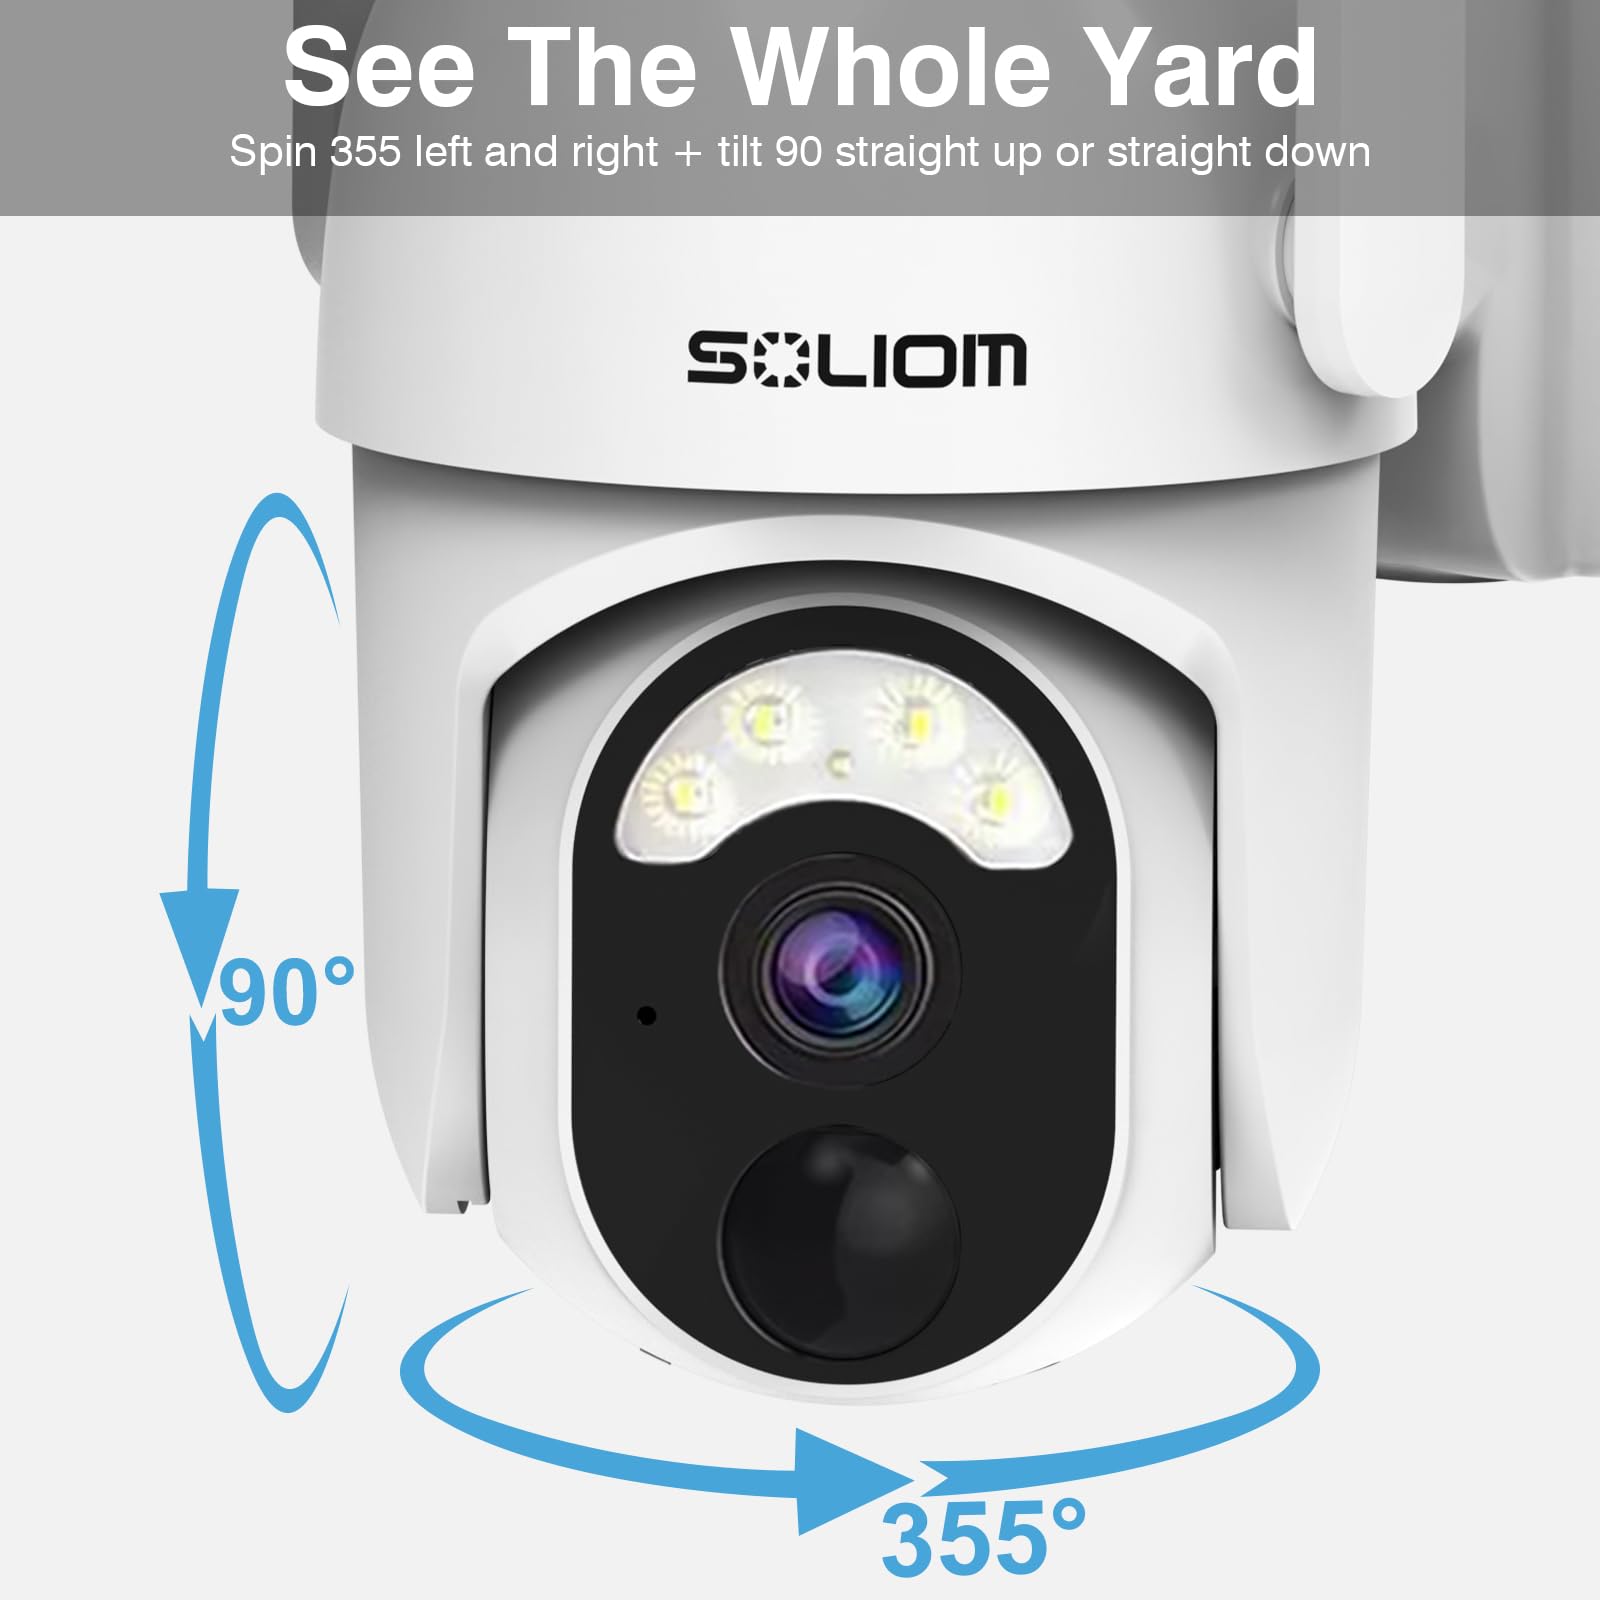 SOLIOM S40R 4G PT LTE Cellular-Security-Camera with Binding SIM Card, with 2K Resolution Video, Spotlight Night Vision, Motion Detection